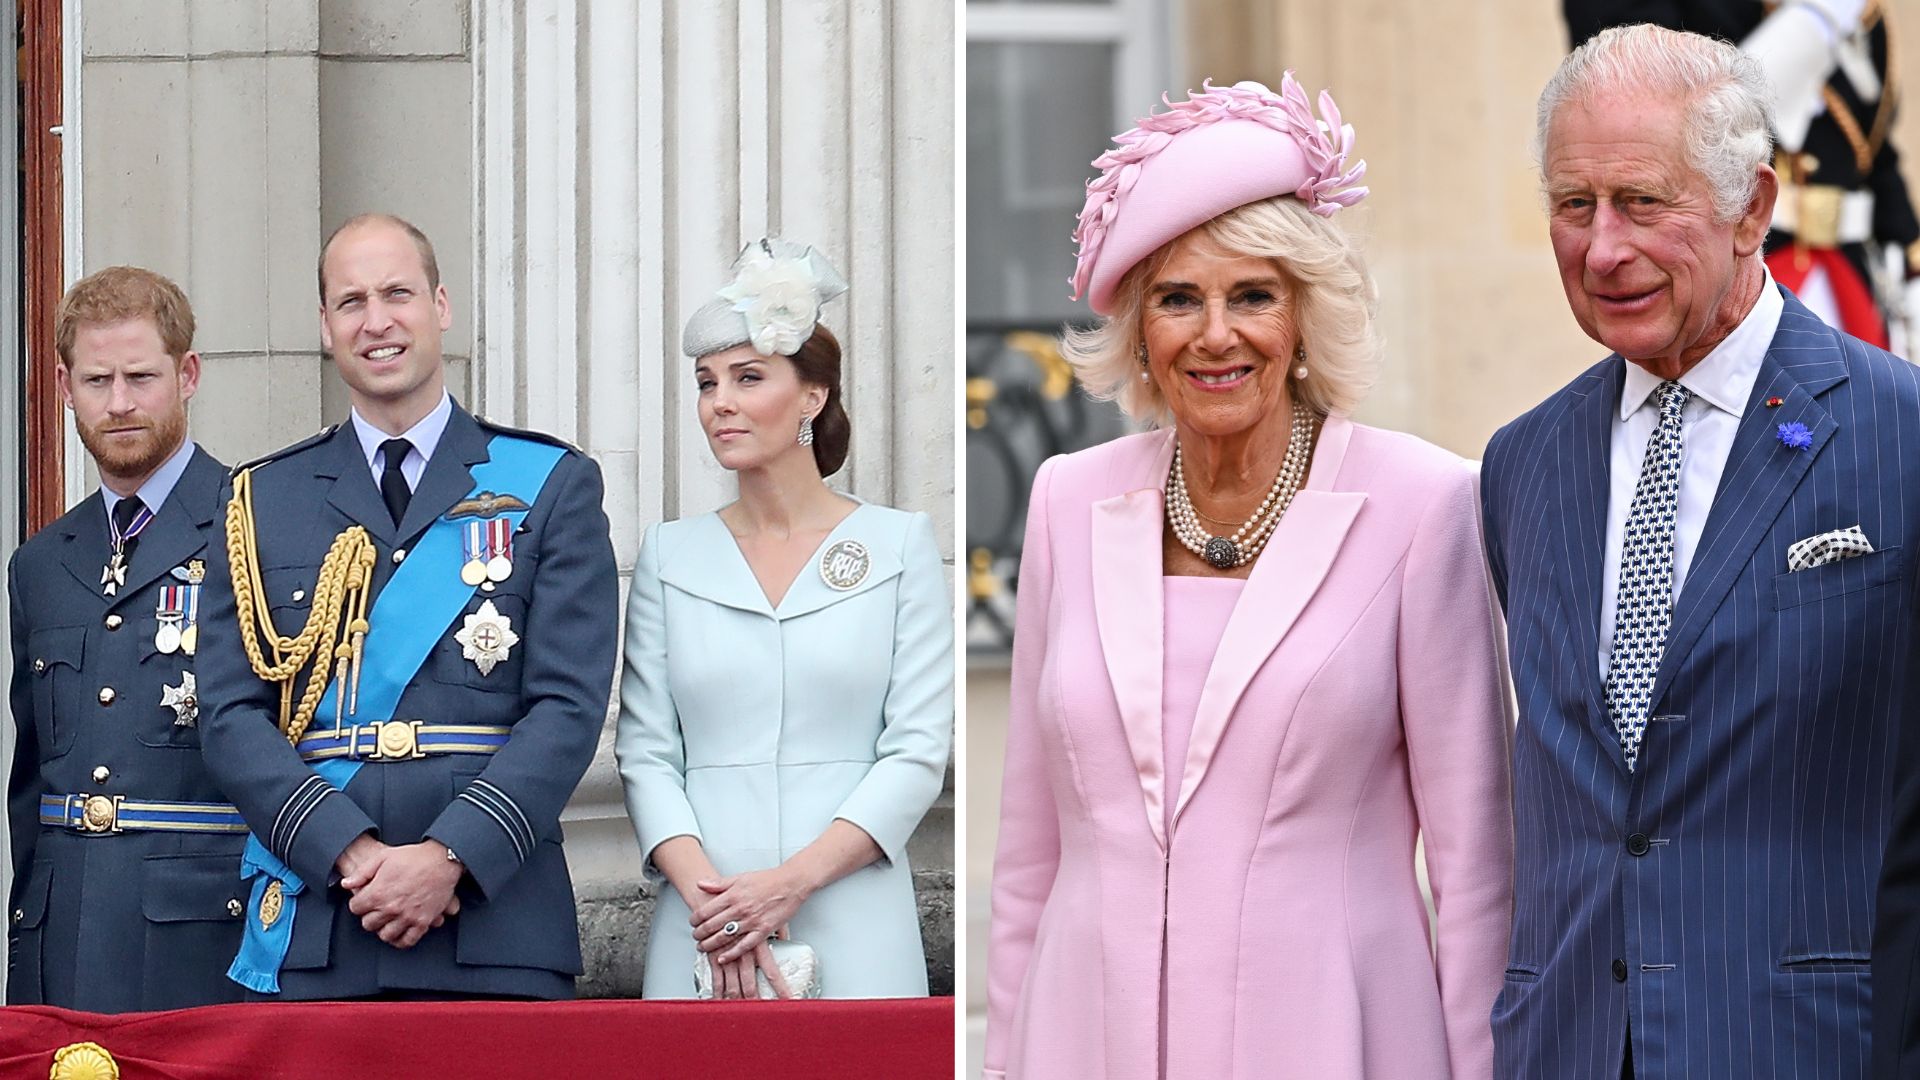 The Duchess of Cornwall: 'I have a profound sense of being at home